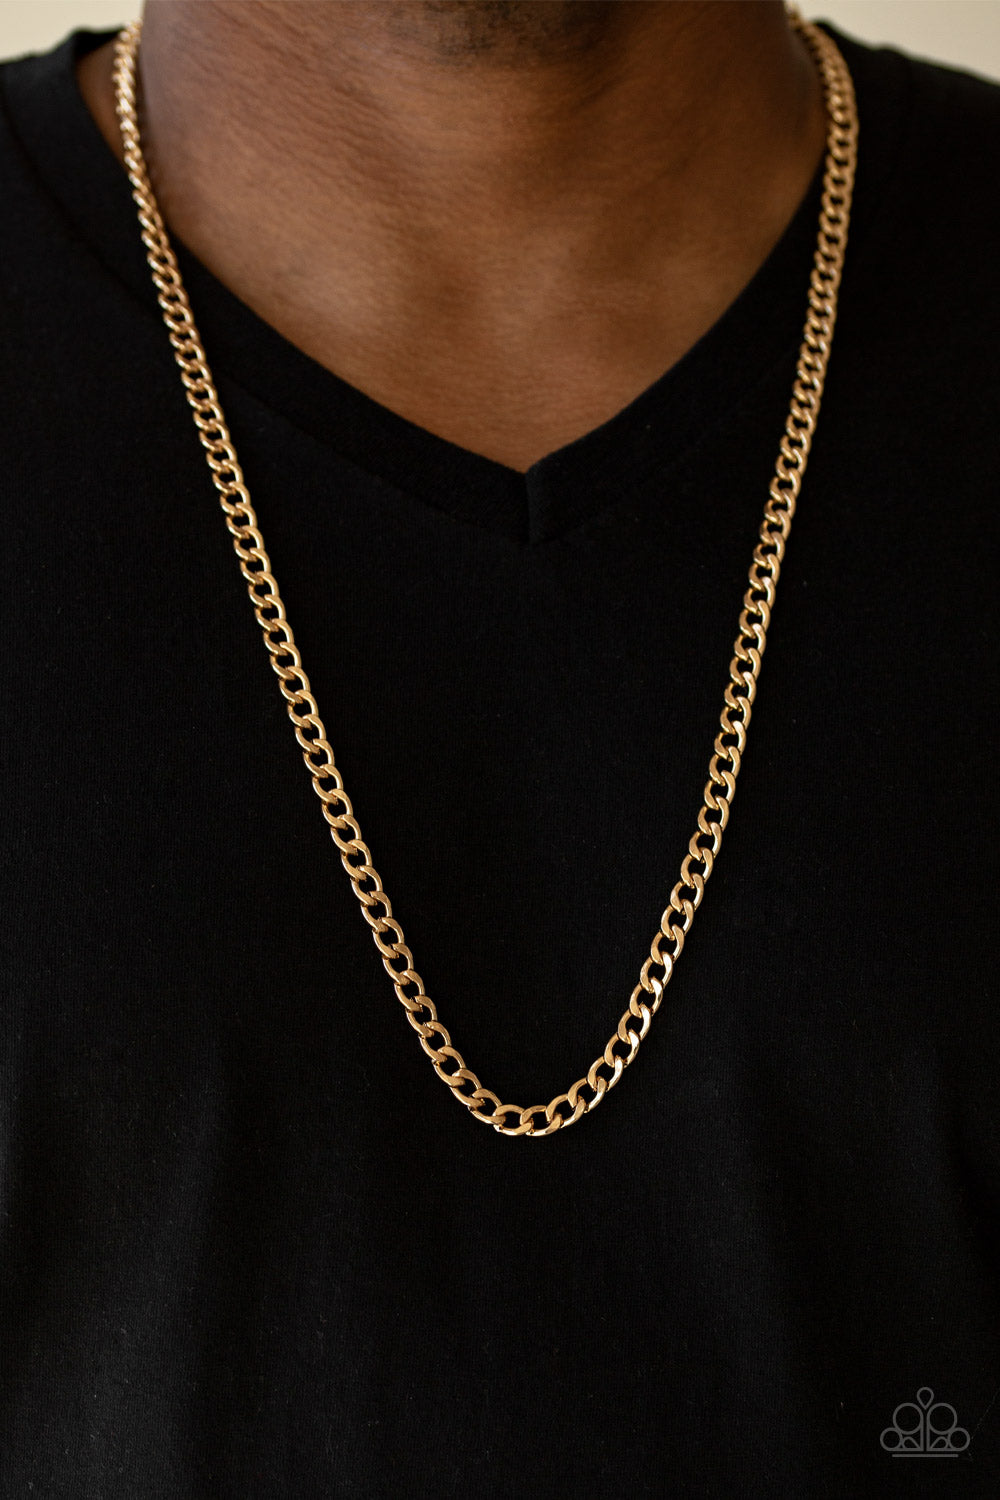 Paparazzi Delta - Gold - Thick Curb Chain Necklace - Men's Collection - $5 Jewelry with Ashley Swint